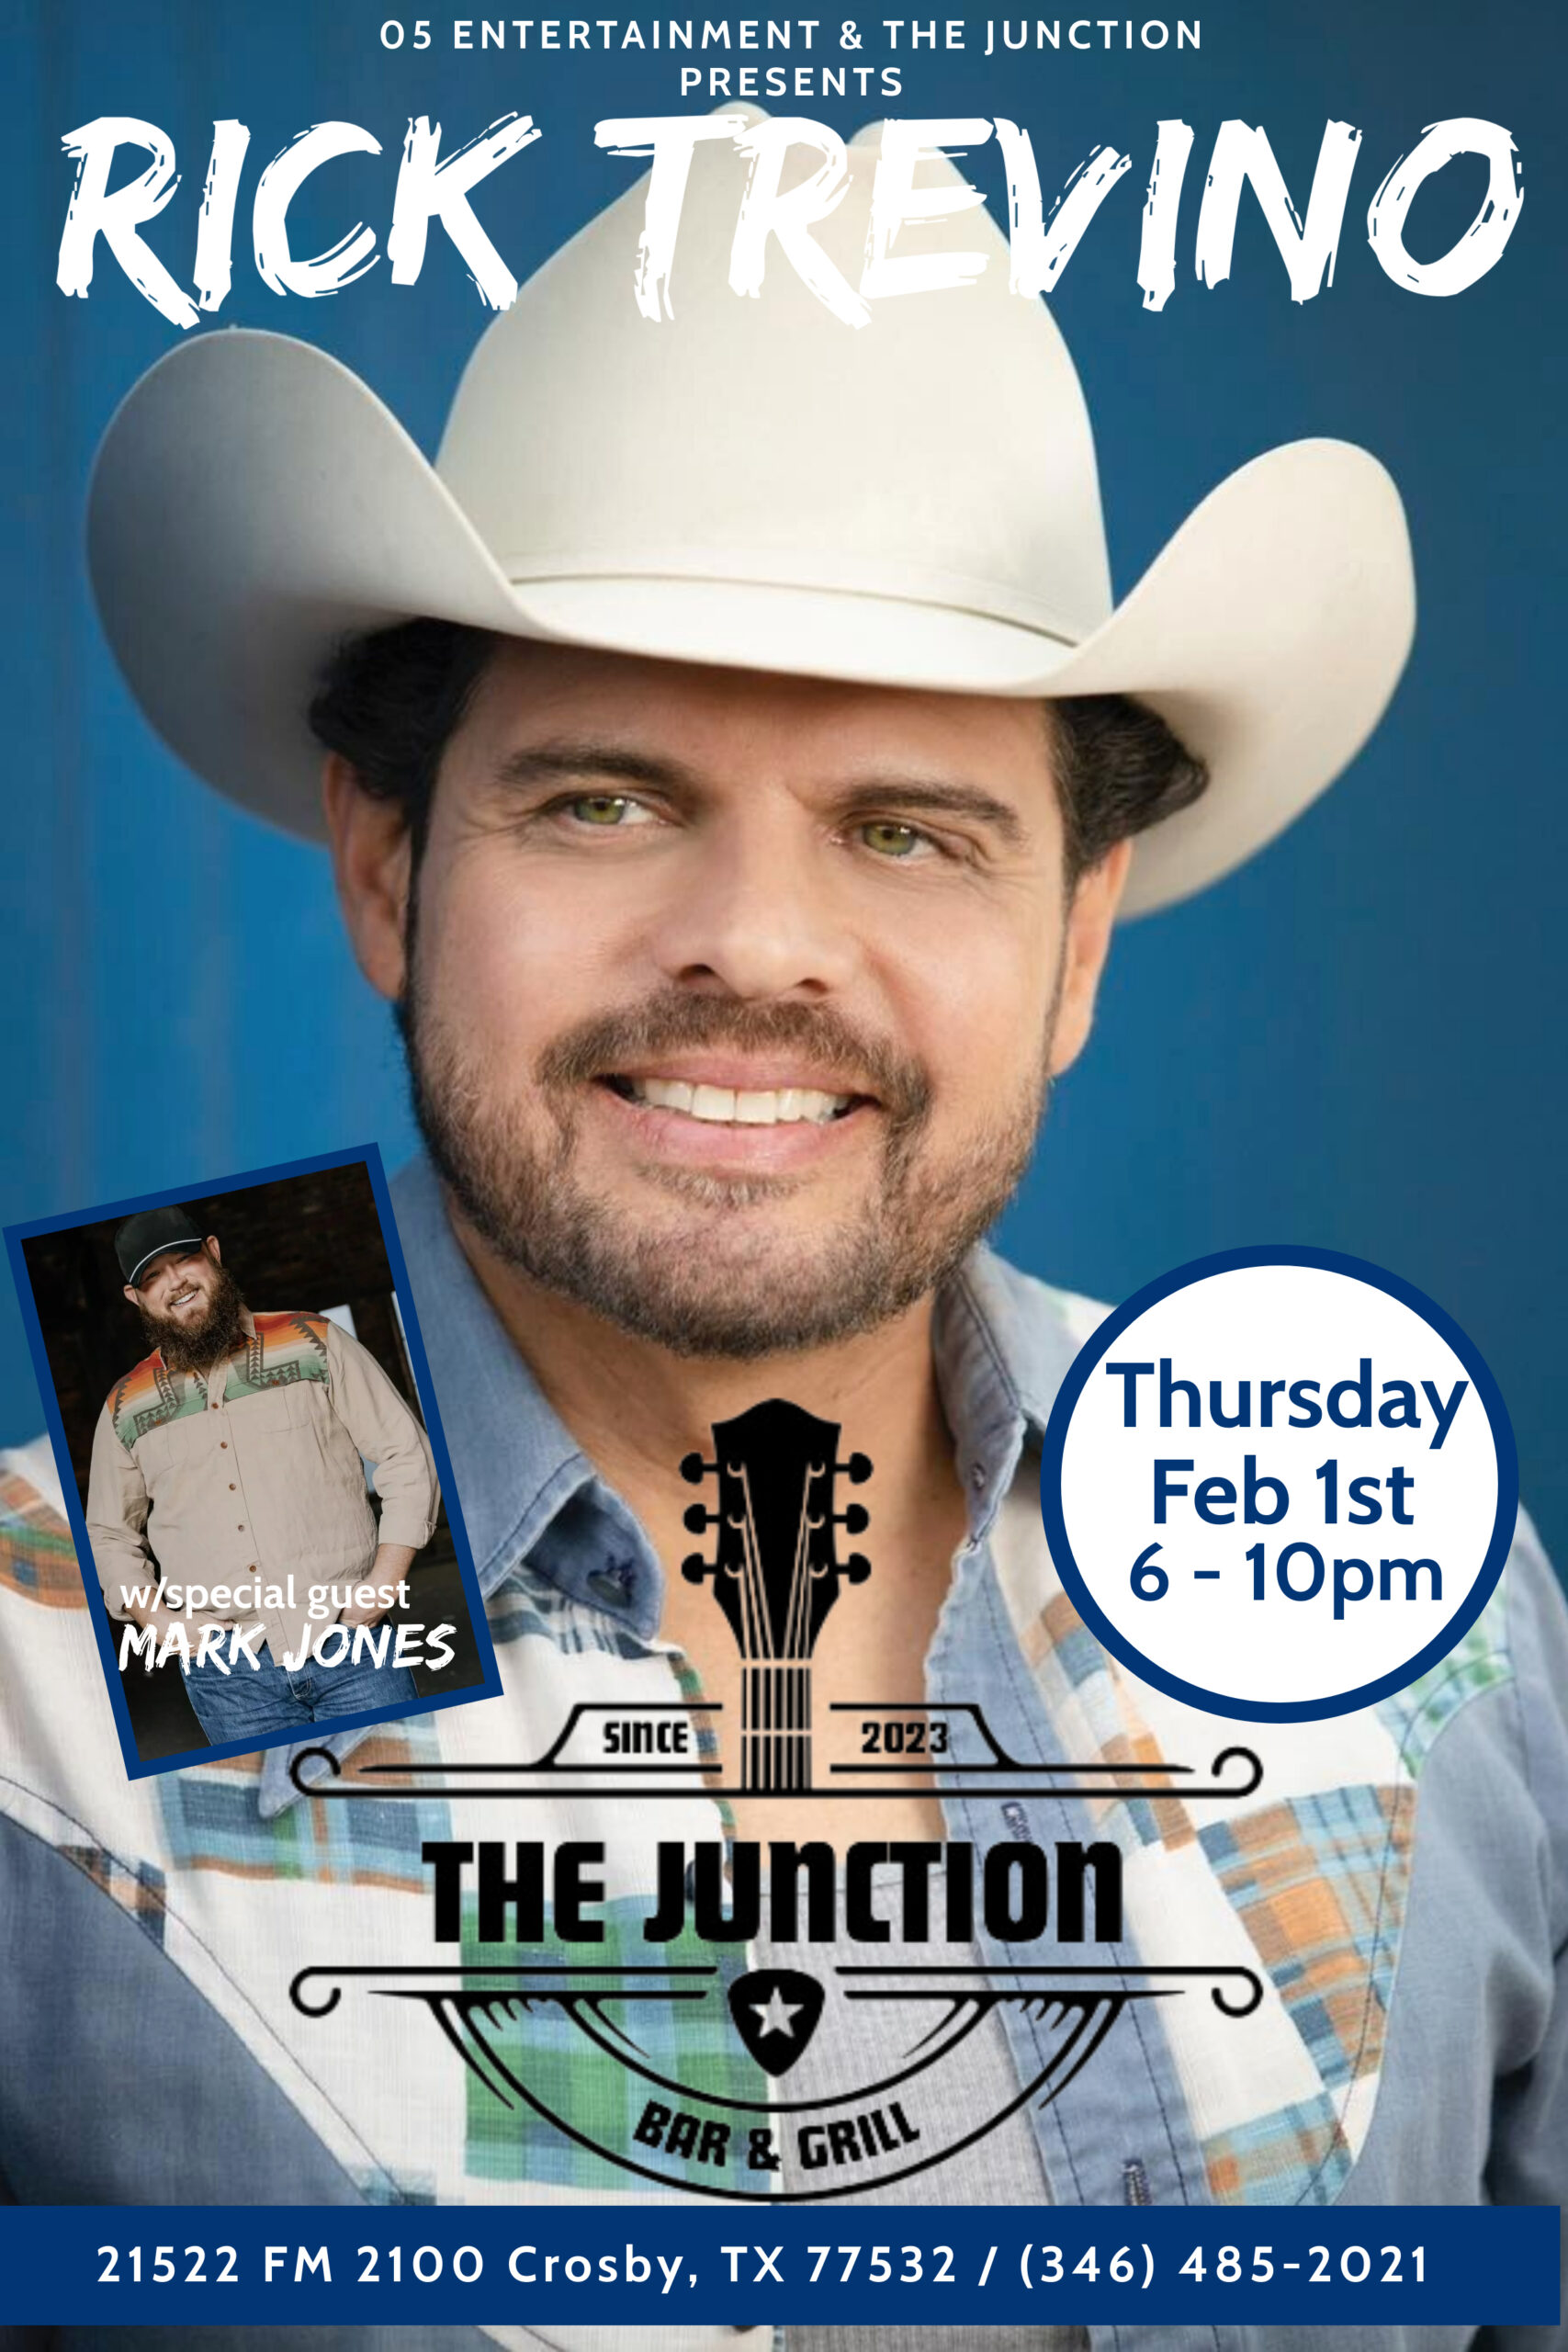 Rick Trevino w/special guest Mark Jones @ The Junction Bar & Grill